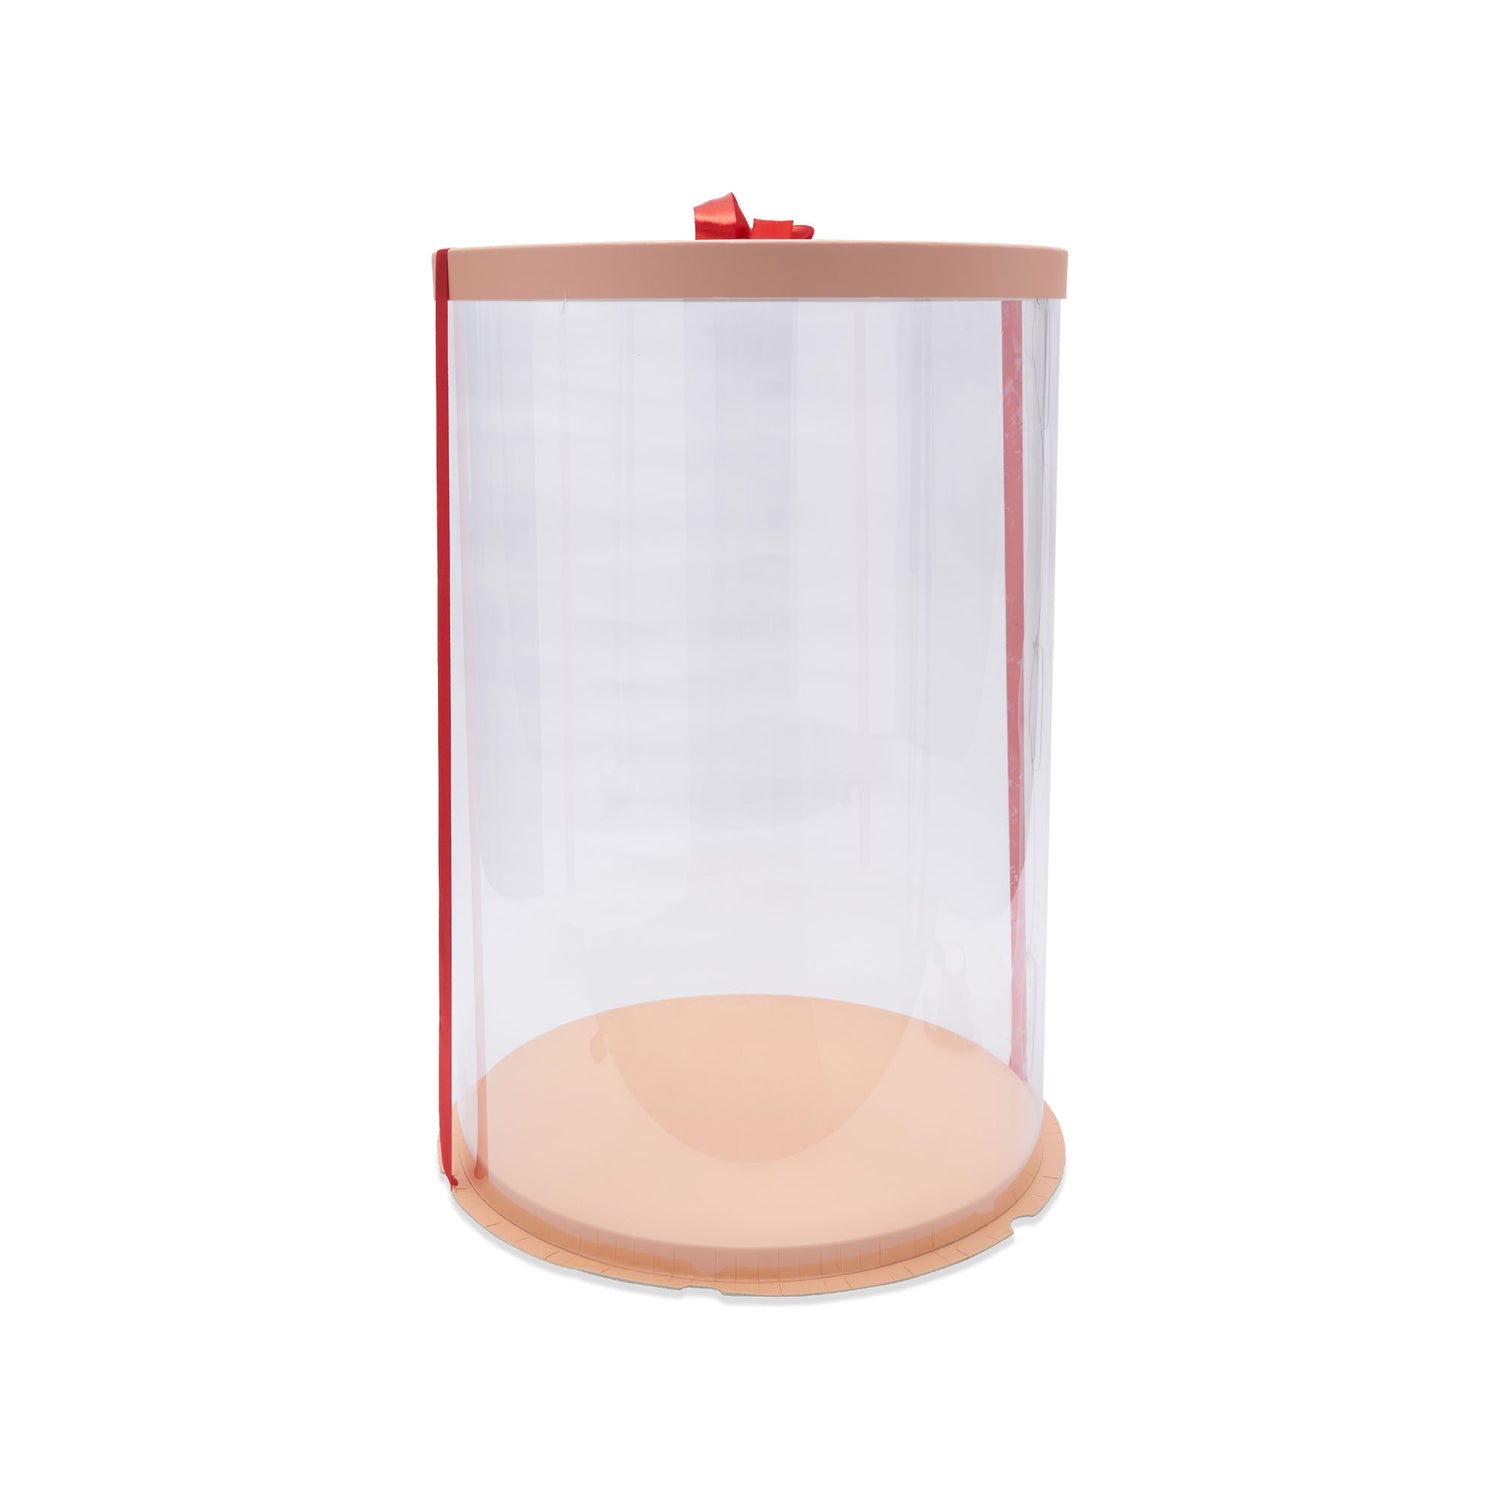 Large Cake Box With Transparent Lid